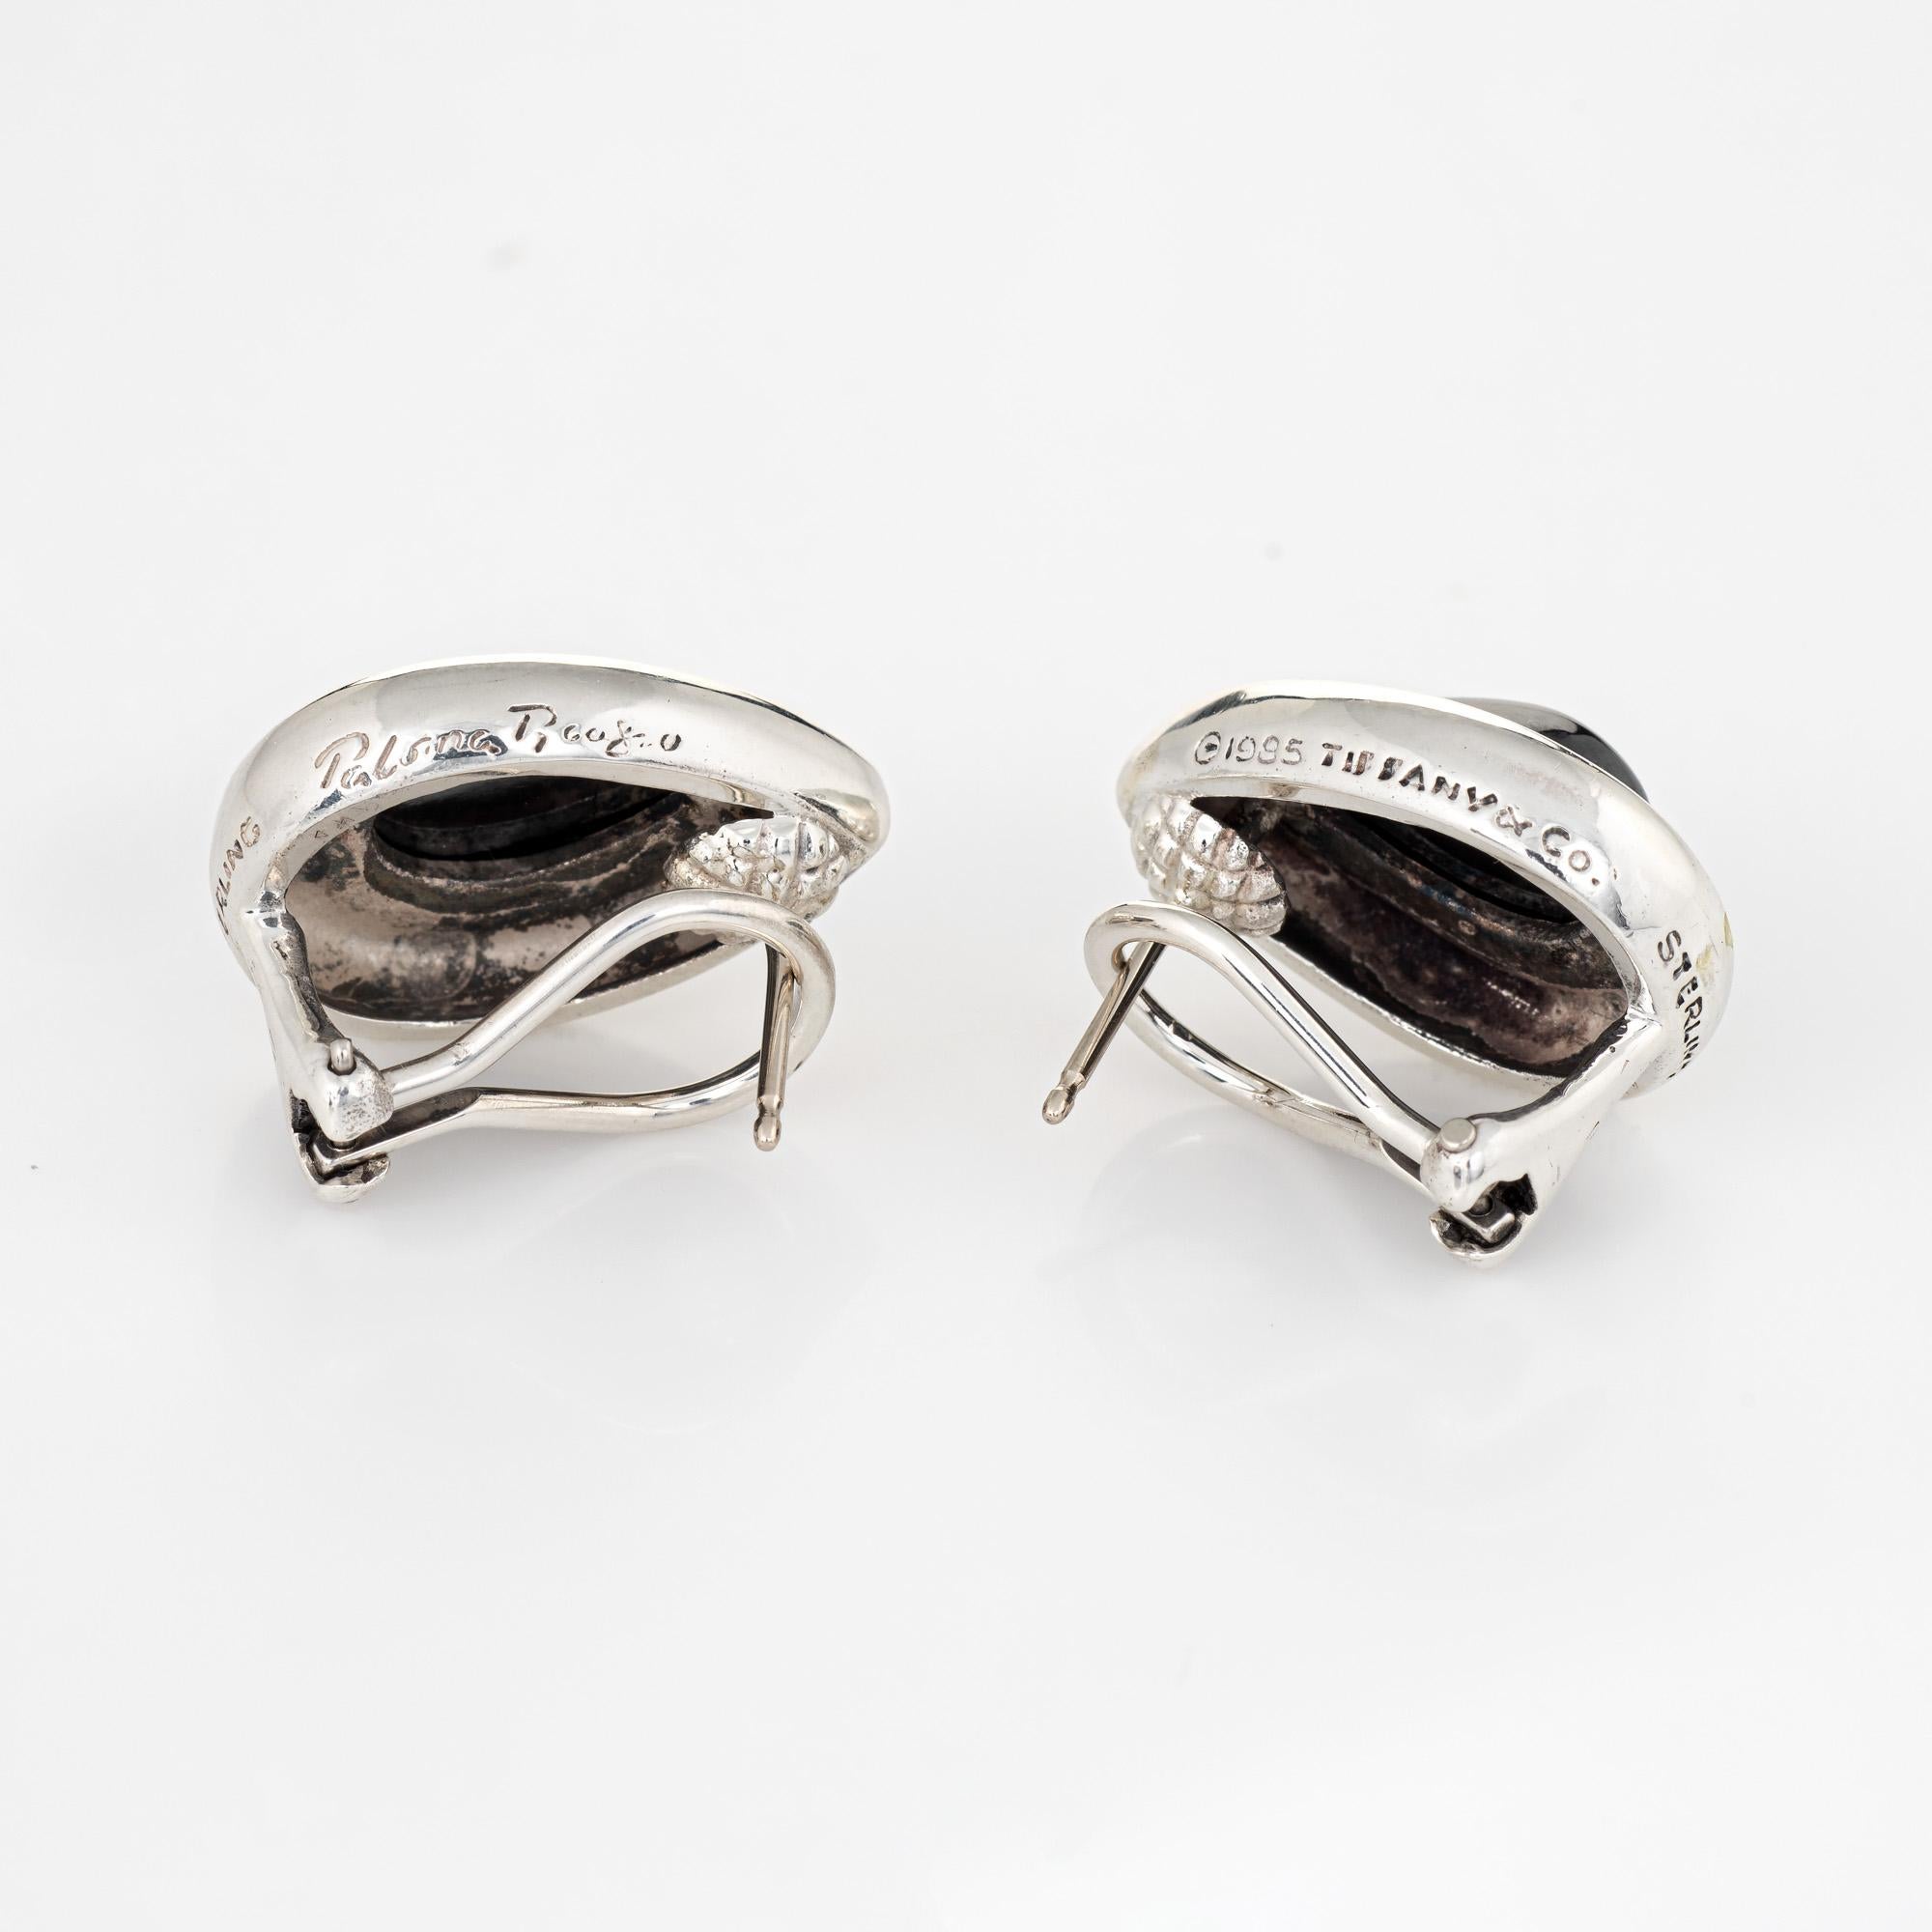 Elegant pair of vintage Tiffany & Co hematite earrings (circa 1995) crafted in 18k yellow gold. 

Hematite measures 12mm x 7.75mm (in excellent condition and free of cracks or chips). The earrings are fitted with post and hinged omega backings for